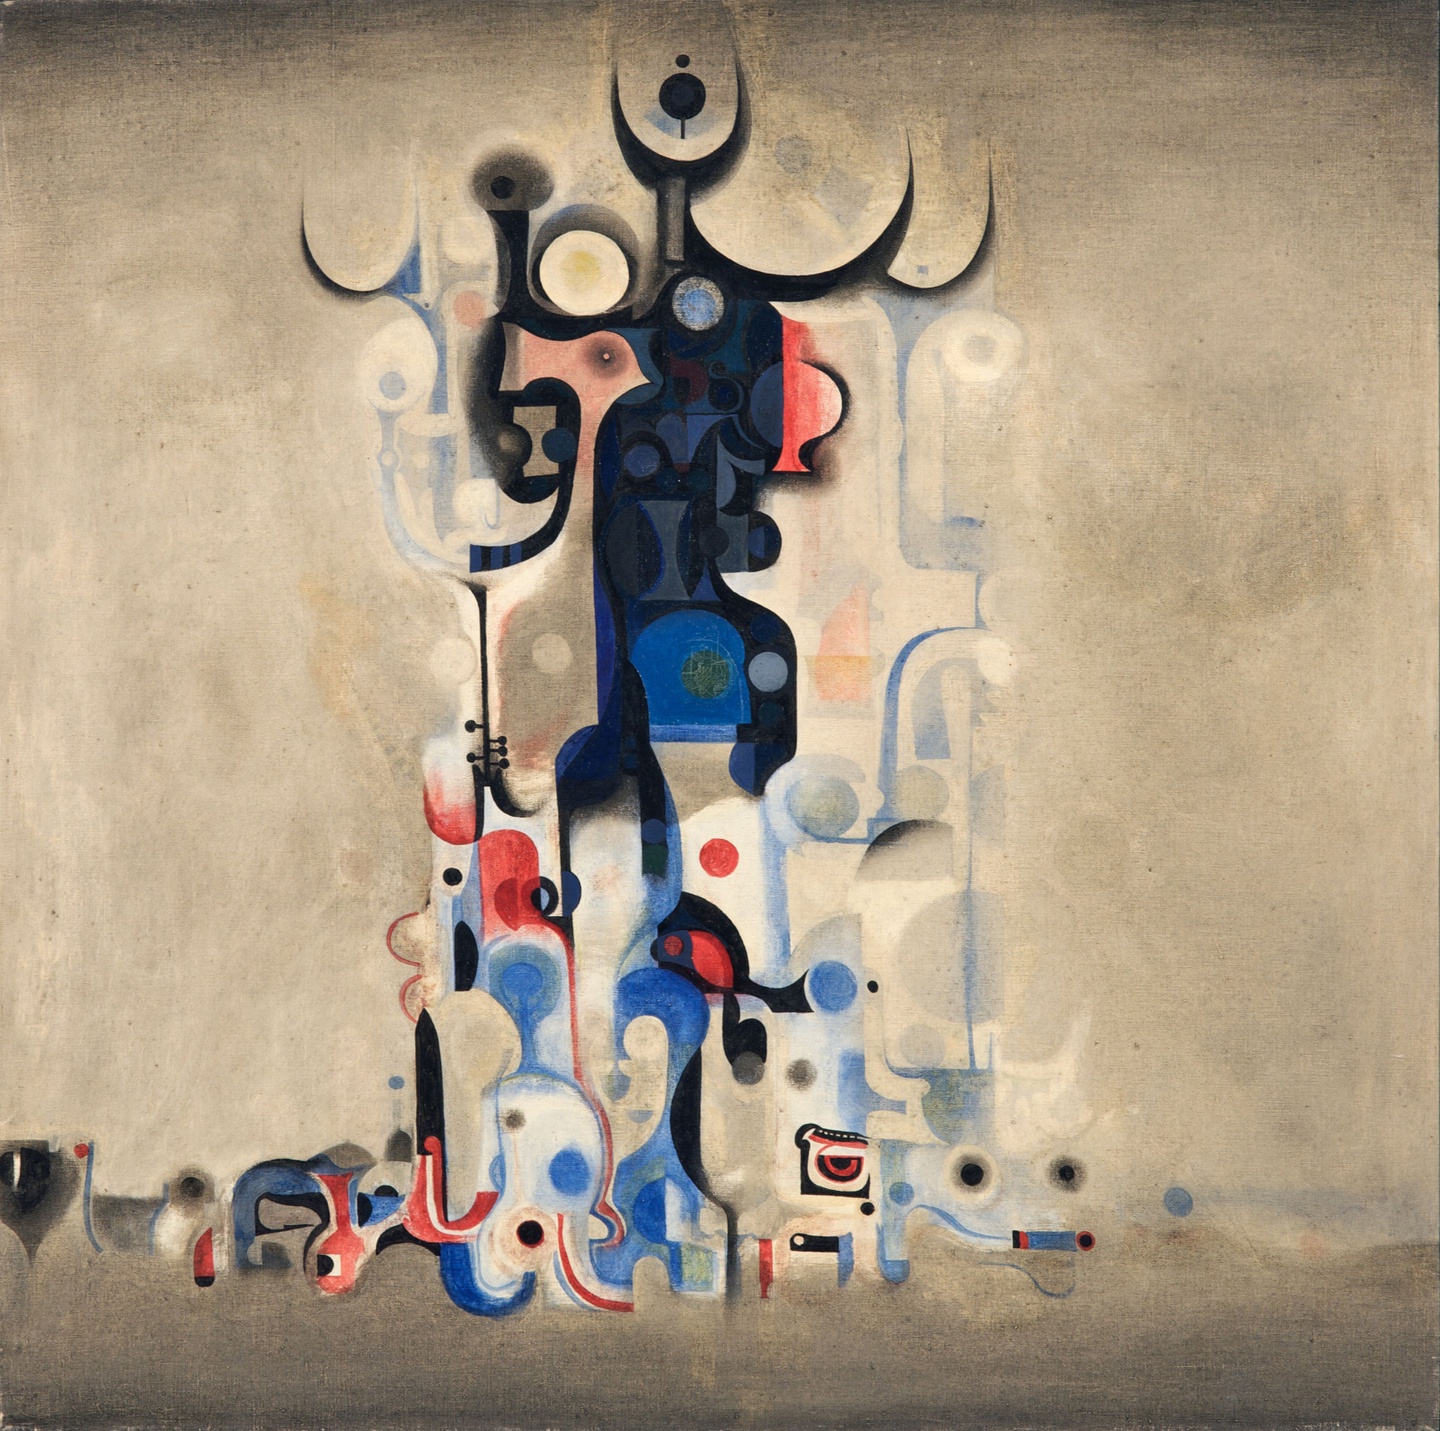 A painting of a columnar accumulation of shapes and symbols in black, red, white, and blue, on a gray ground